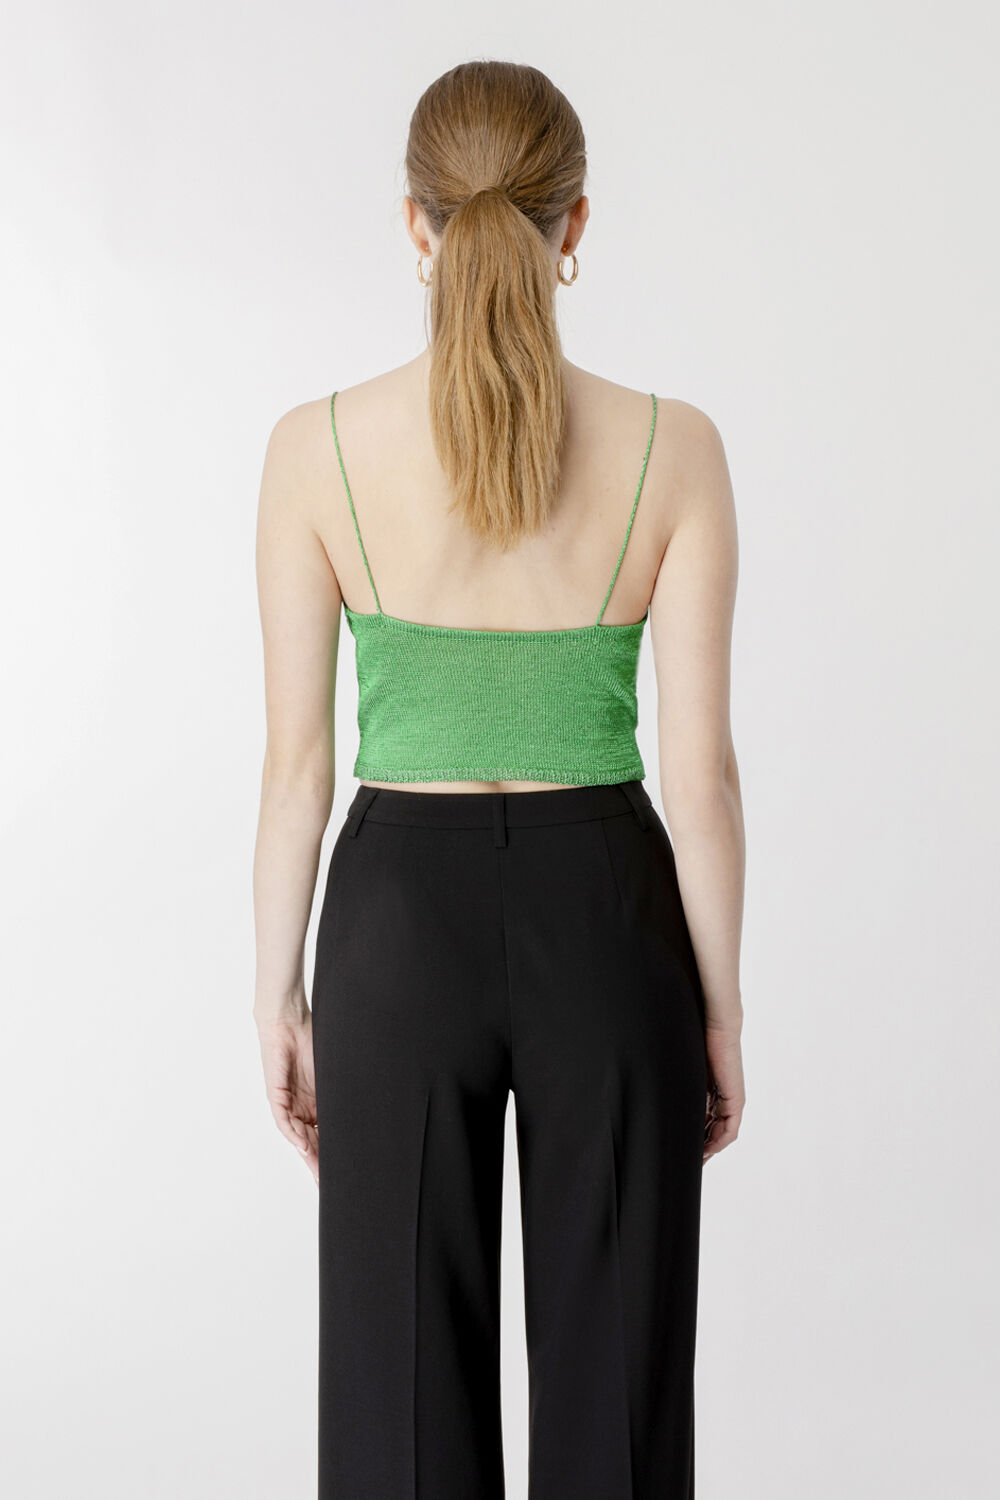 LUREX KNIT TOP in colour BRIGHT GREEN